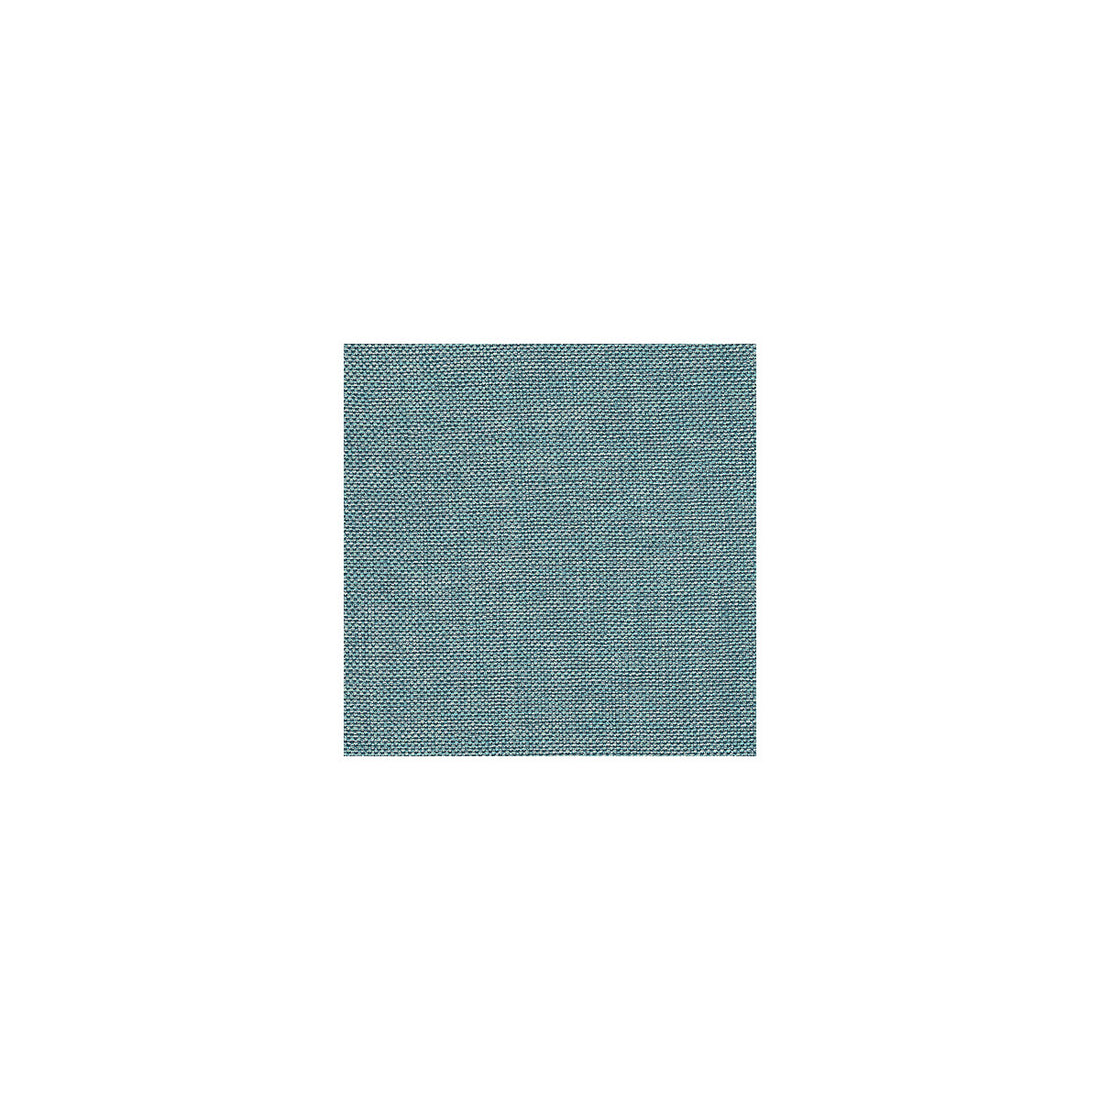 Kravet Basics fabric in 30299-5 color - pattern 30299.5.0 - by Kravet Basics in the Perfect Plains collection